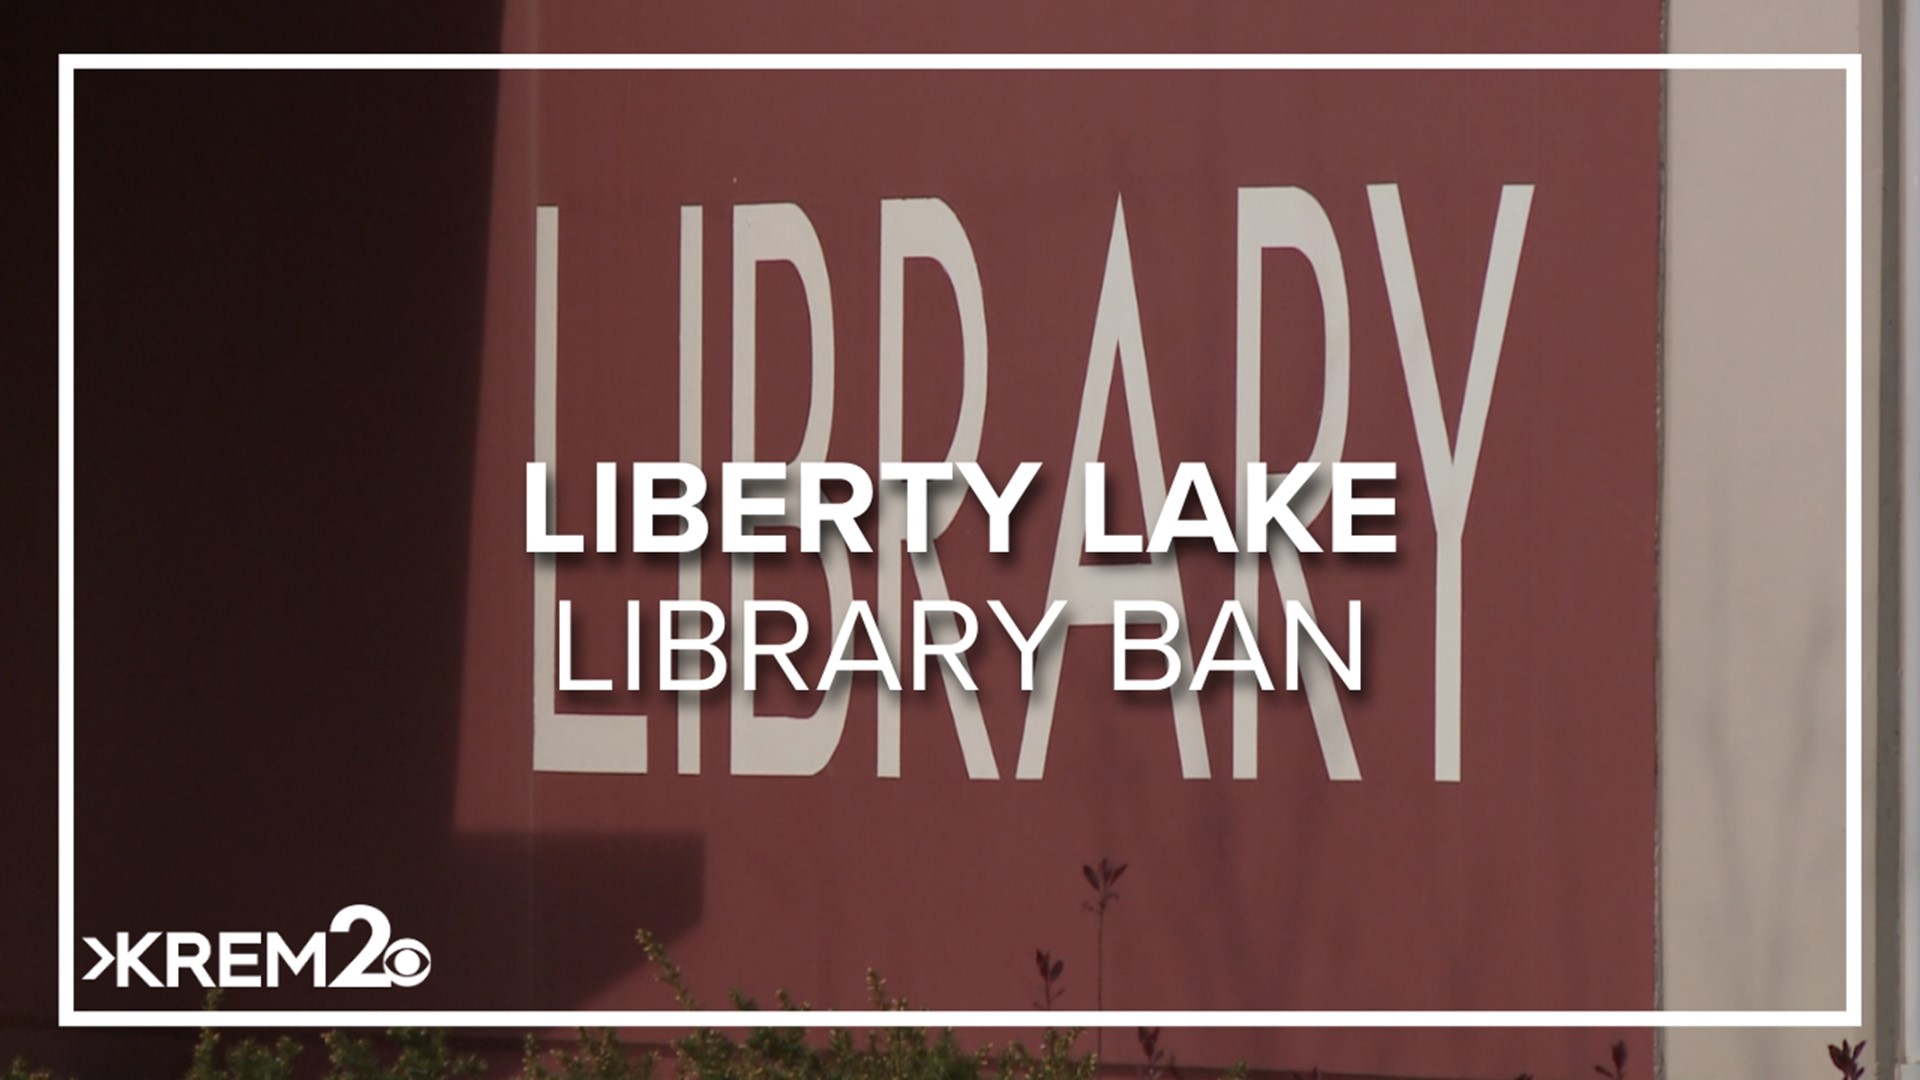 An ordinance to give the council more say over library policies failed under mayoral veto in May. Now, the issue is on the table again.